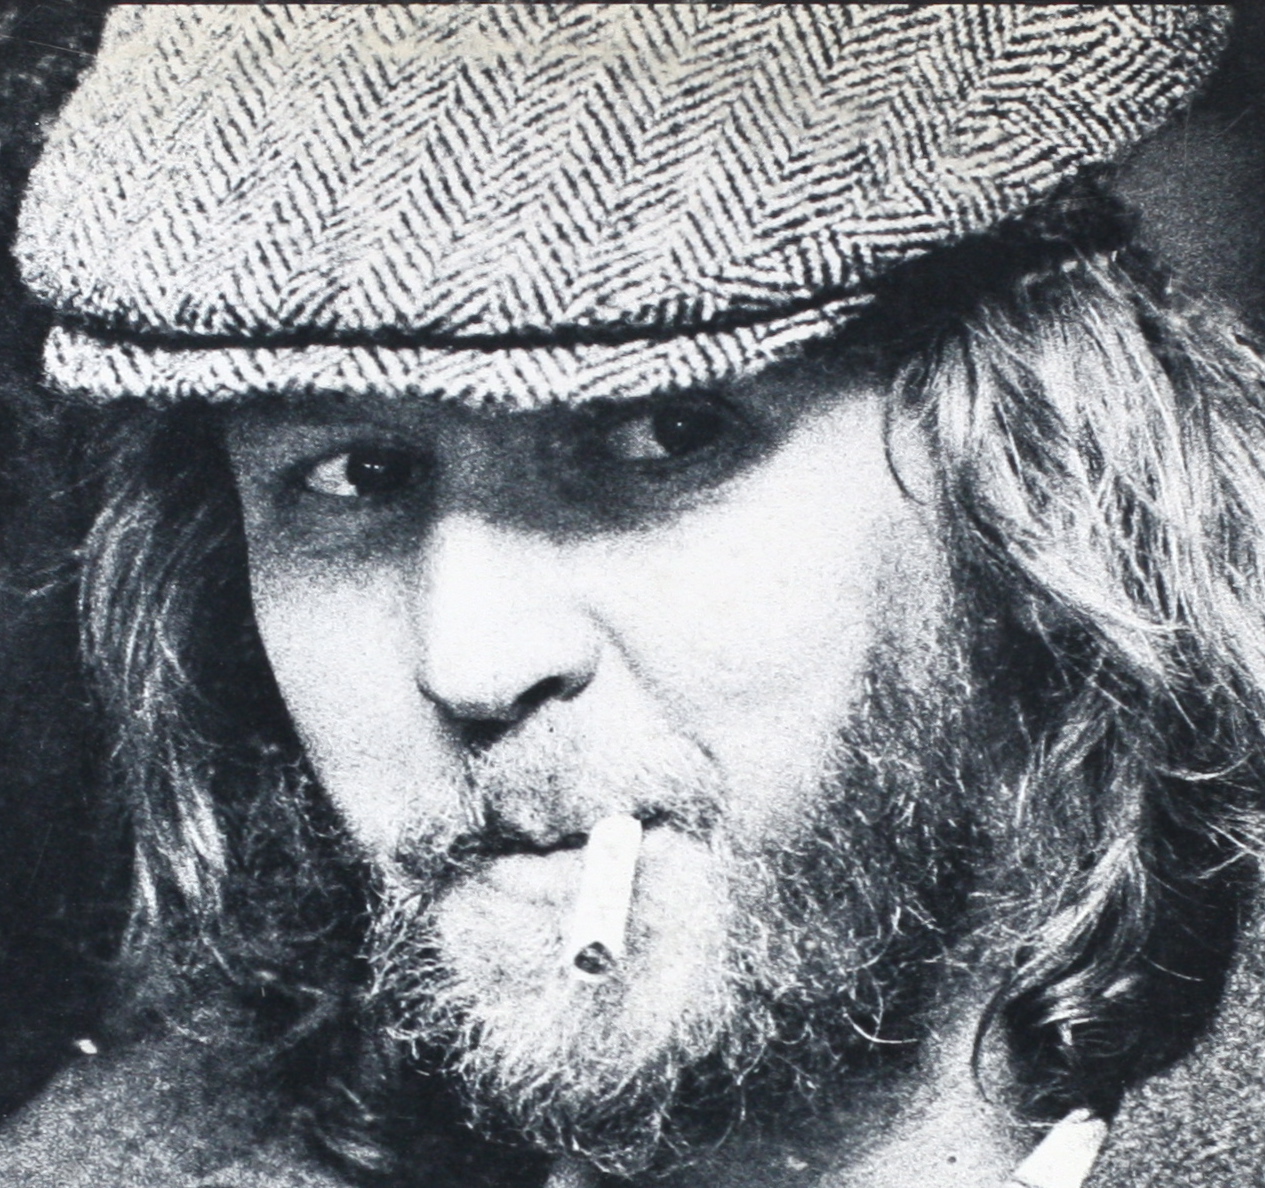 a black and white po of a man with long hair wearing a hat and smoking